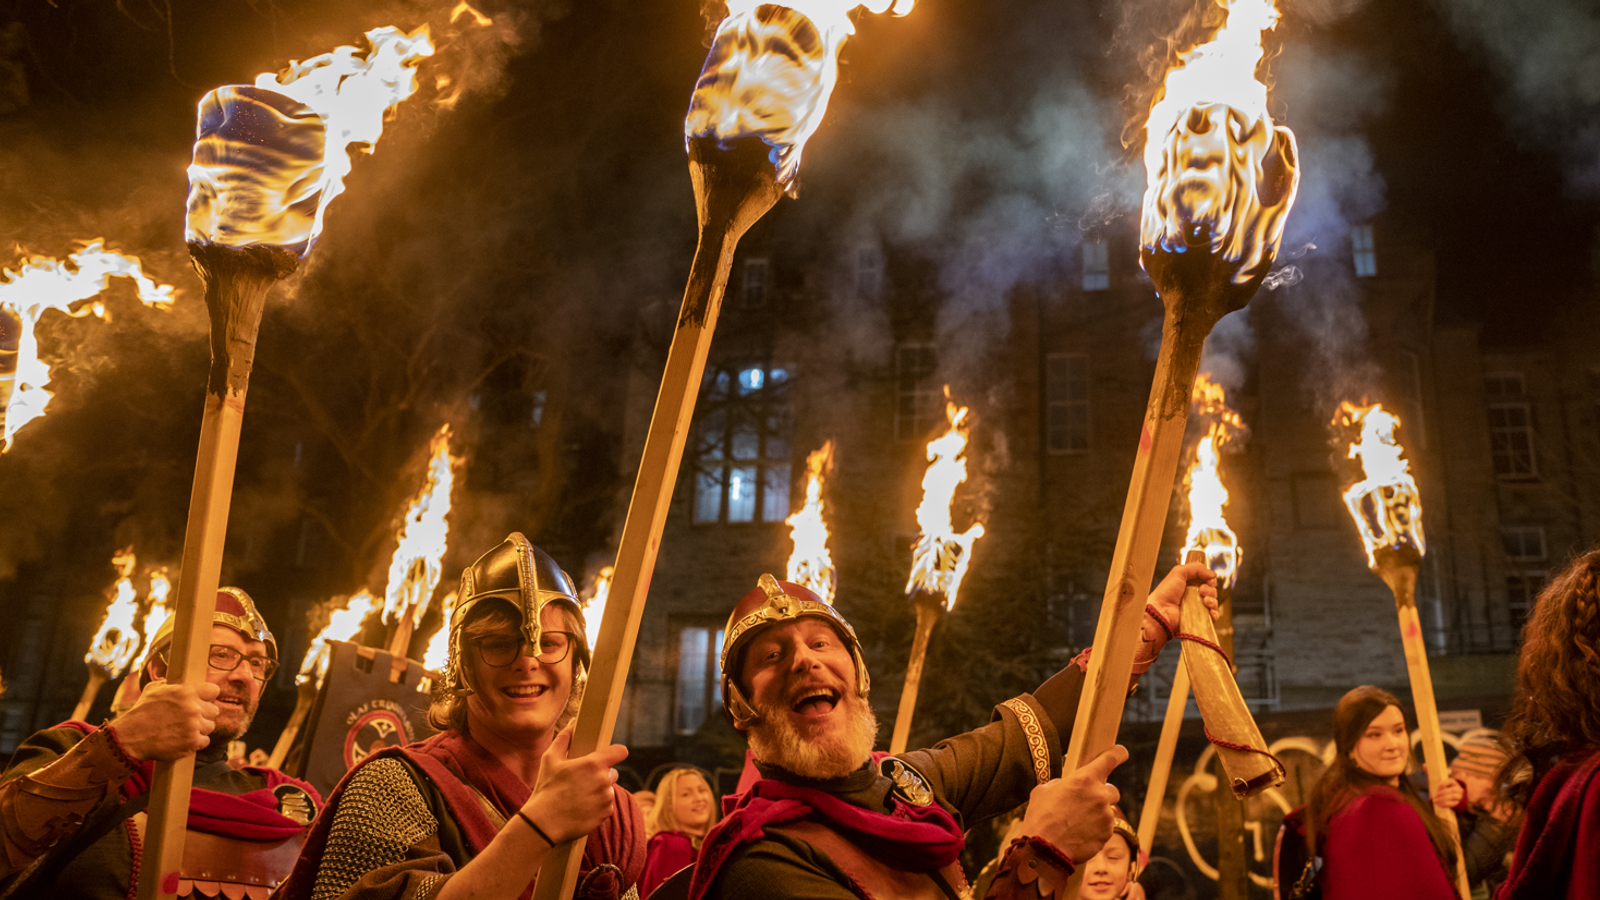 Up Helly Aa: Women and girls to join Shetland’s annual Viking fire festival ‘jarl squad’ for first time | Ents & Arts News